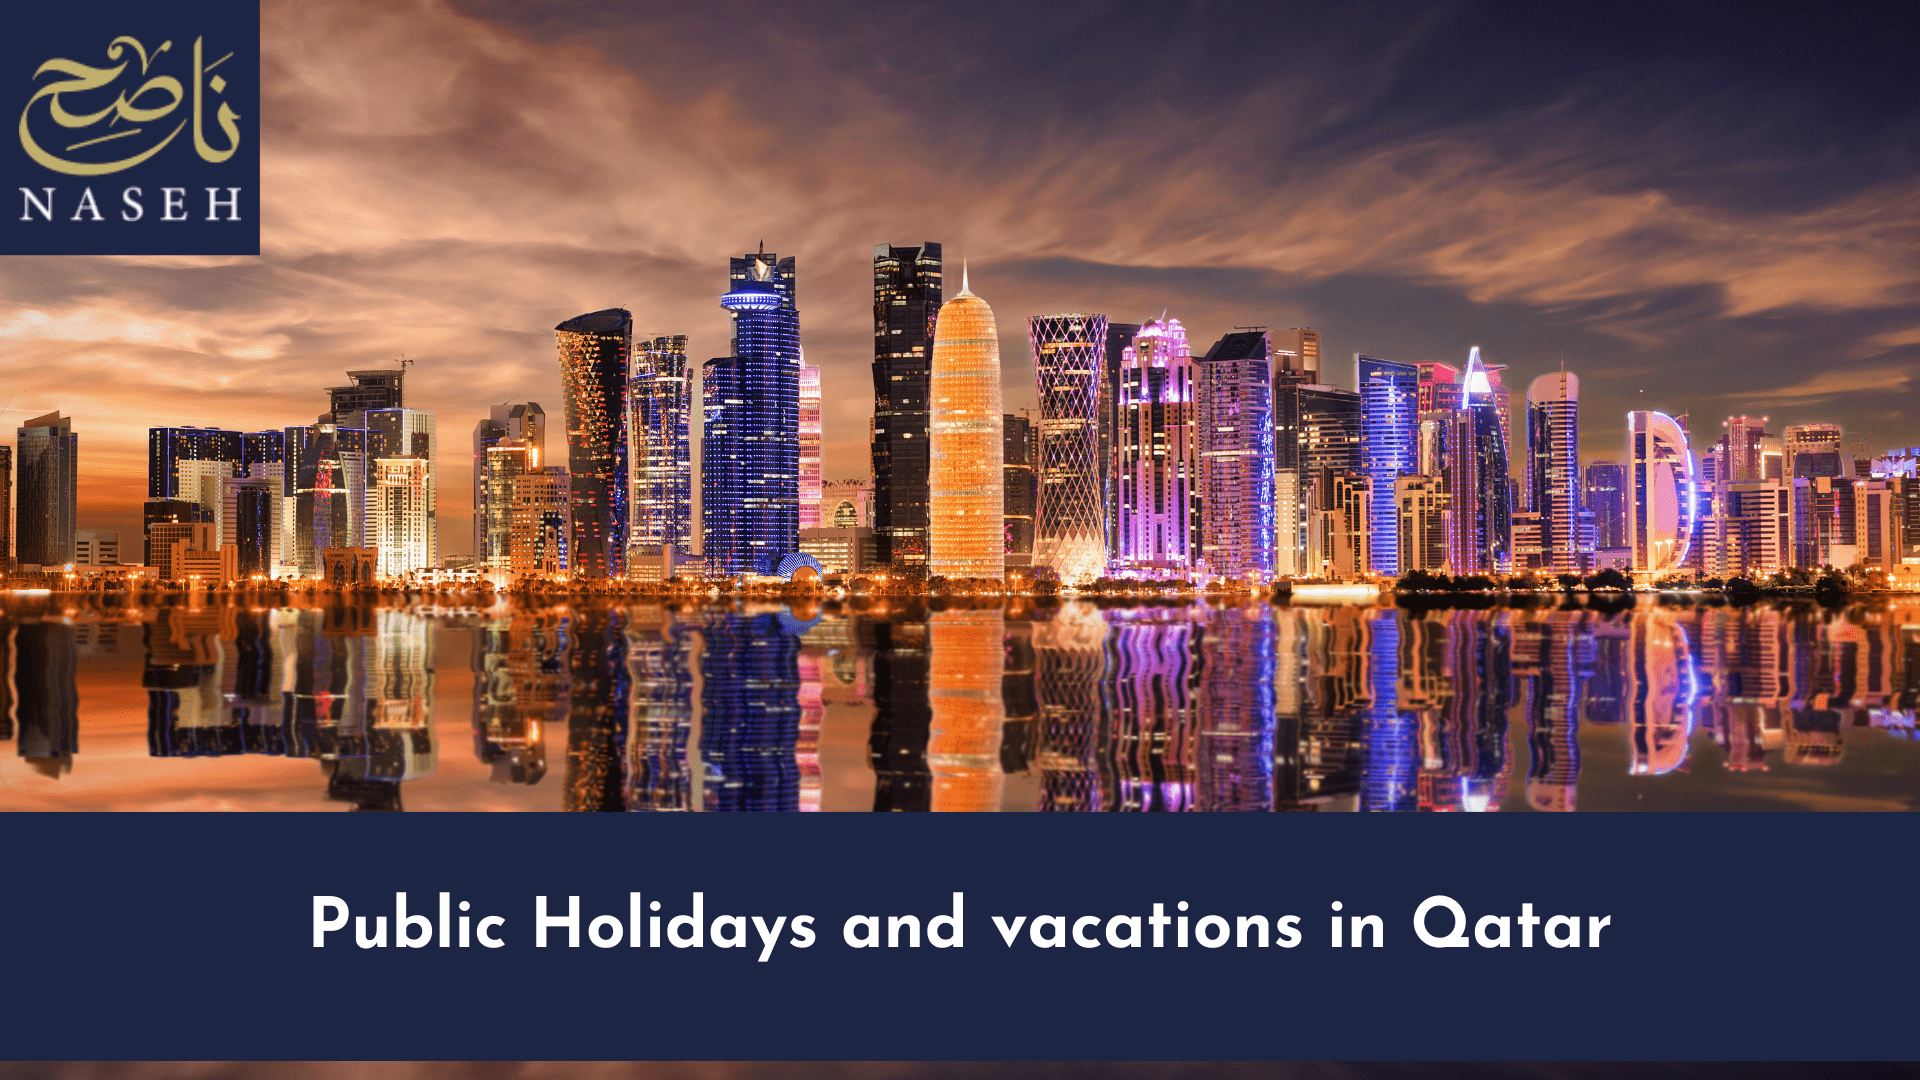 Public Holidays in Qatar: What Days Off Can You Expect at Work?